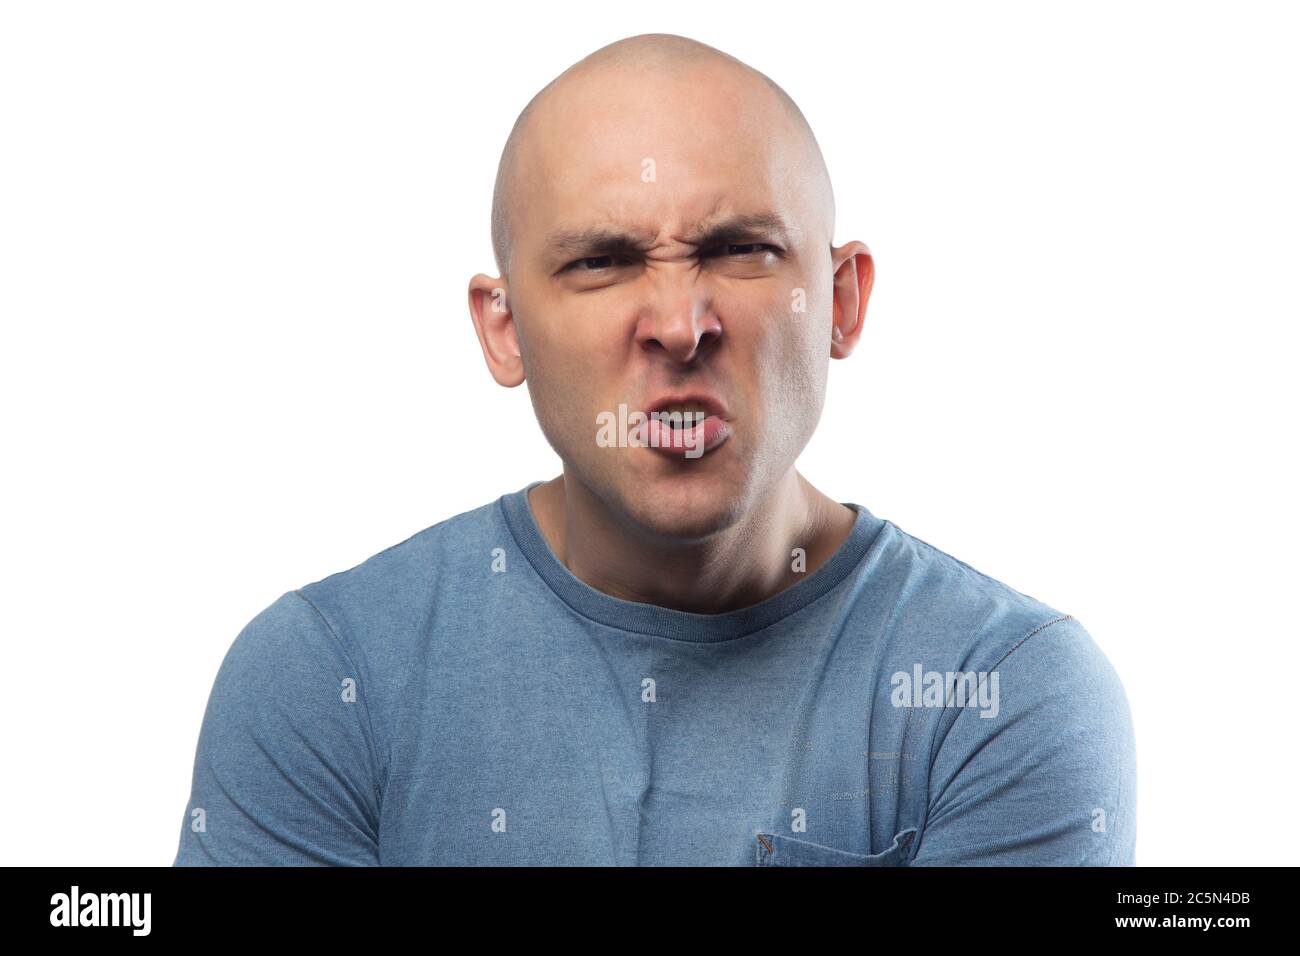 Photo of young bald aggressive man in blue tee shirt Stock Photo